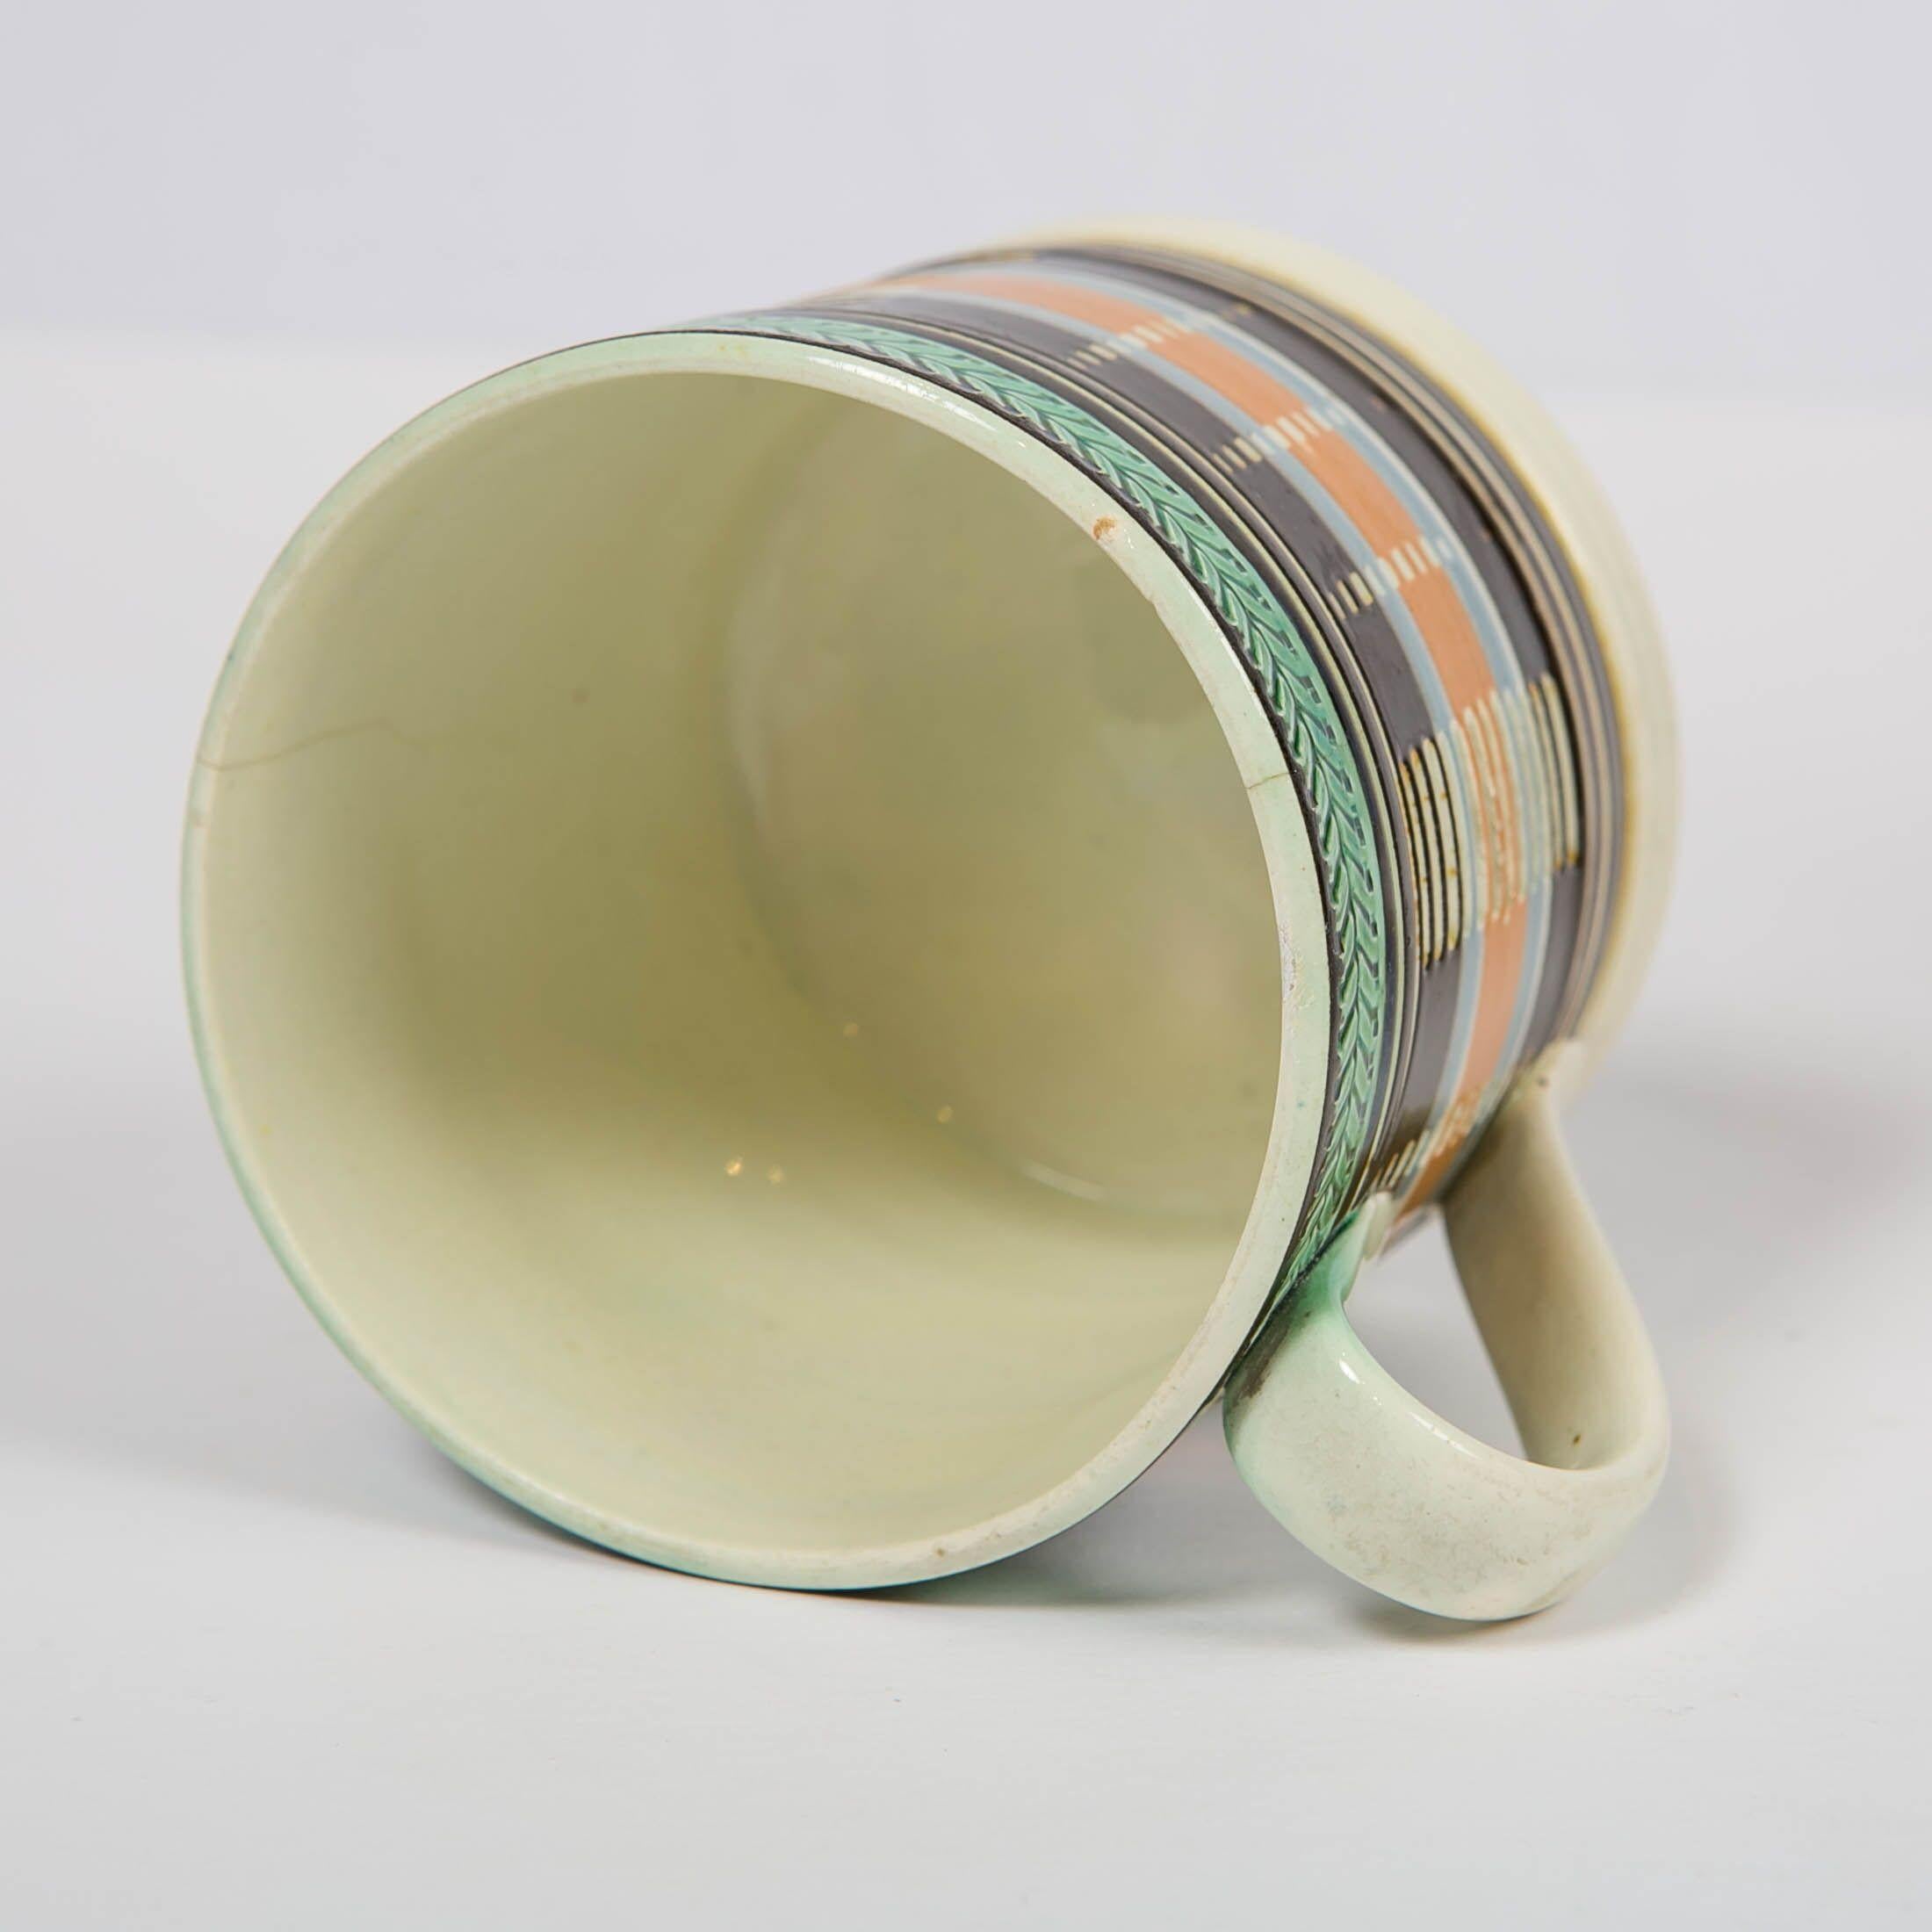 Early 19th Century Mochaware Mug with Slip Decoration Made in England, circa 1820